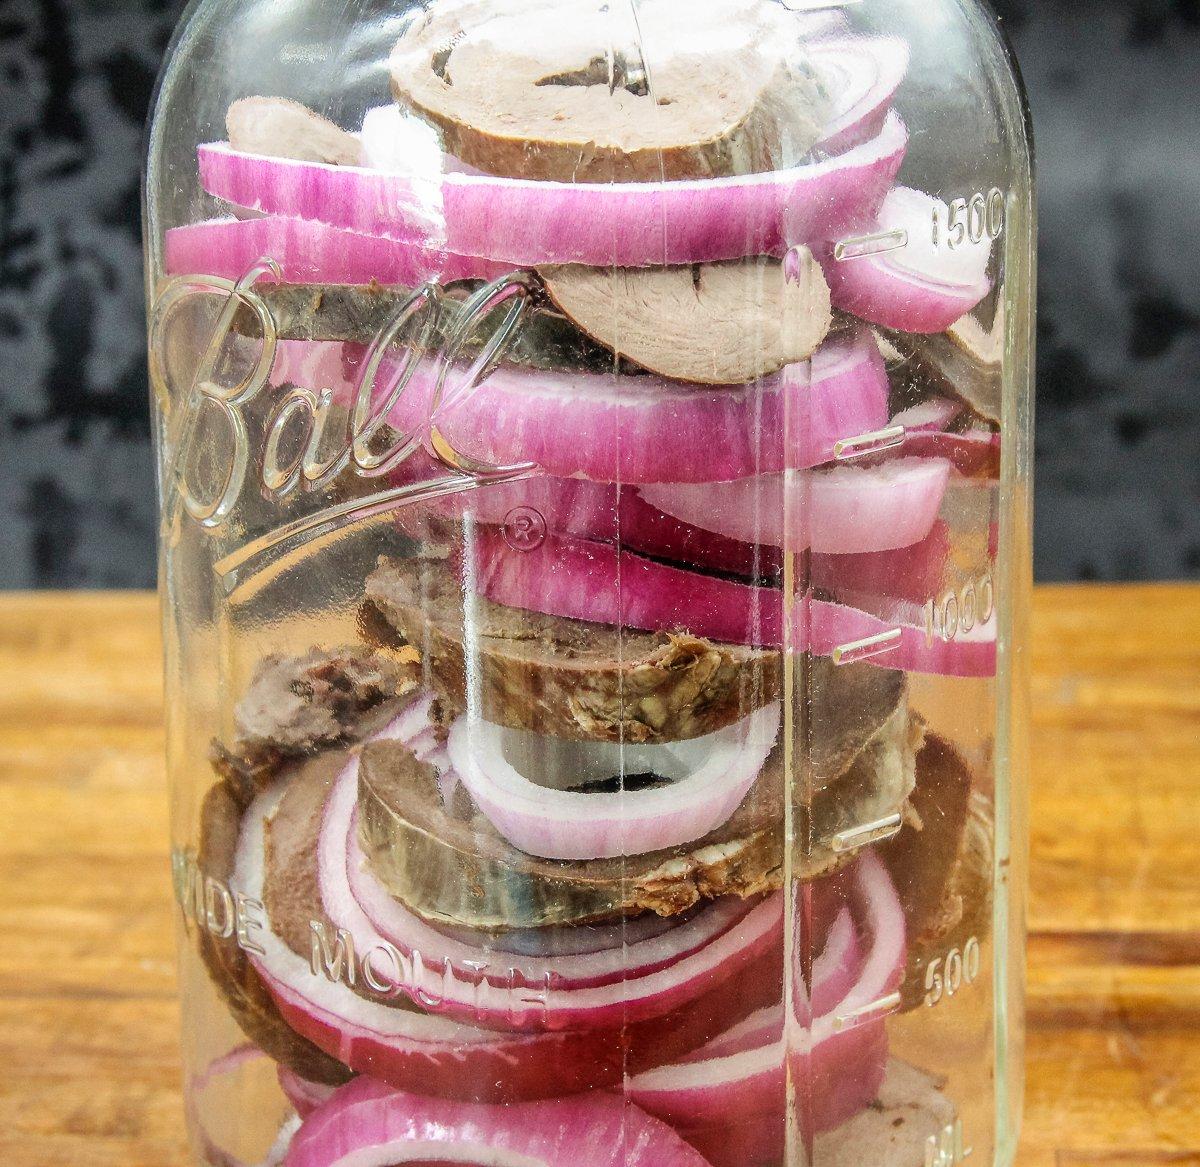 Layer the heart and onion in a clean jar before pouring over the pickling brine.